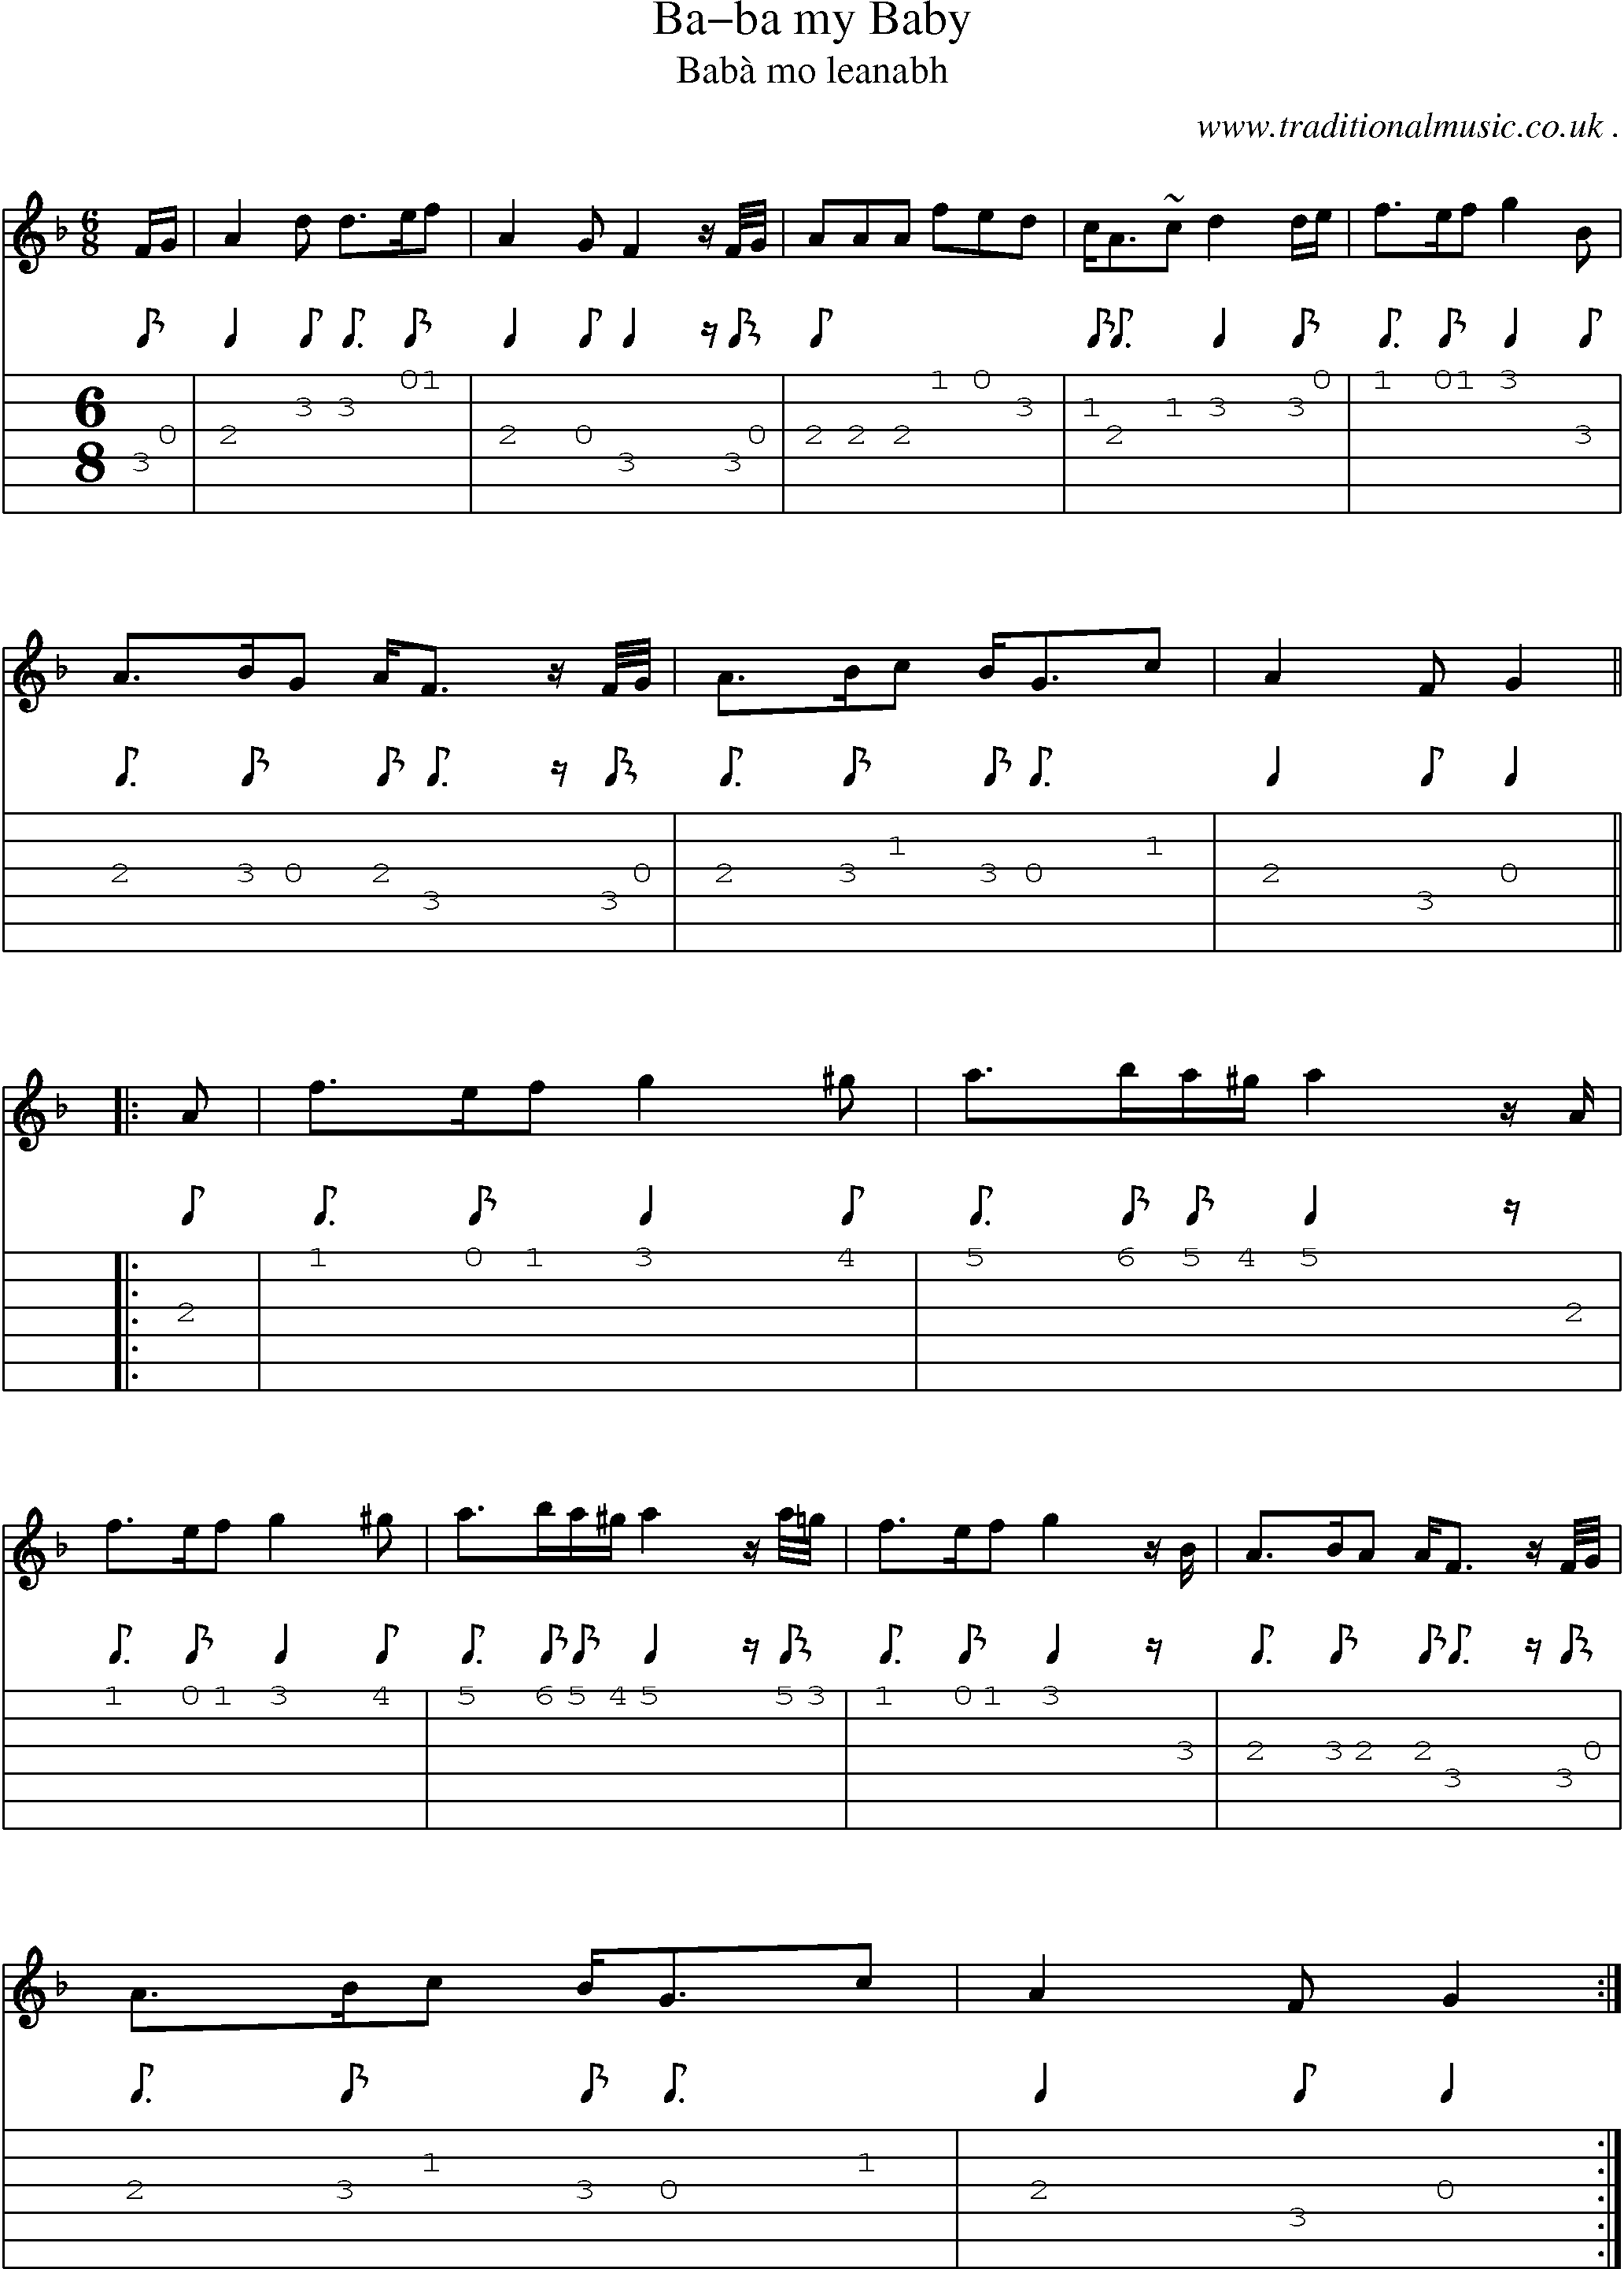 Sheet-music  score, Chords and Guitar Tabs for Ba-ba My Baby